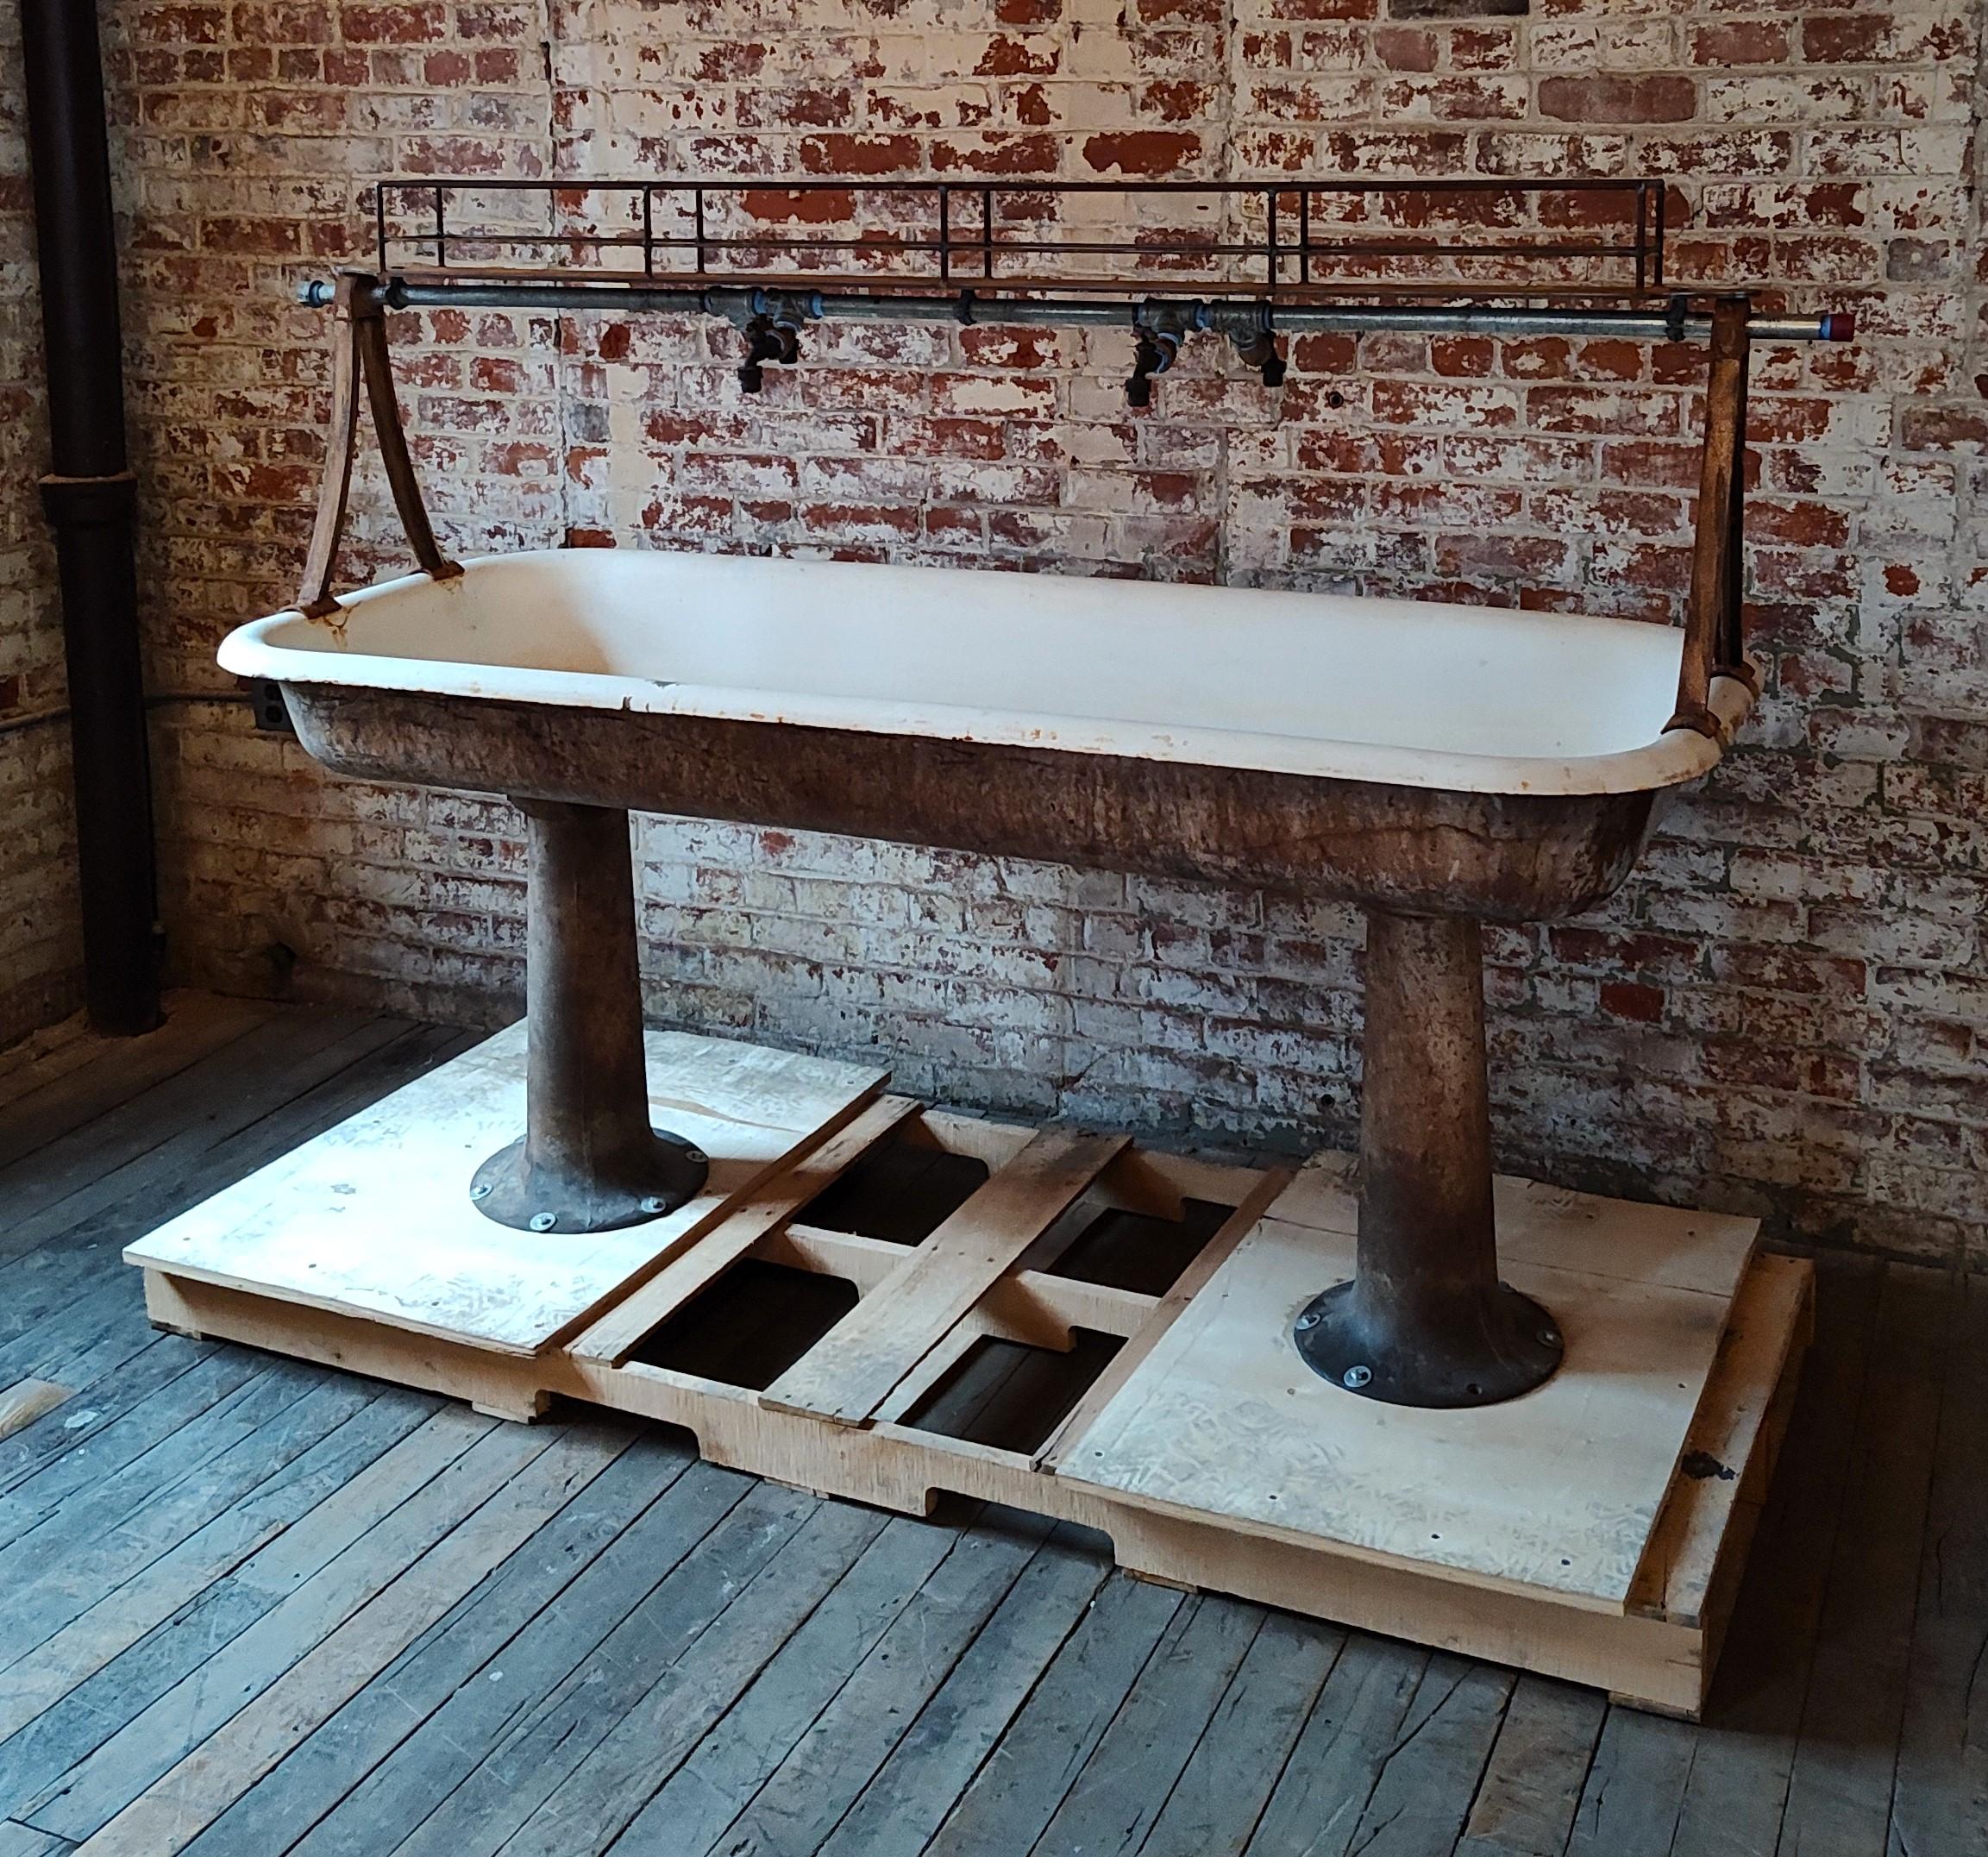 Vintage Trough Sink

Overall Dimensions: 30 1/2